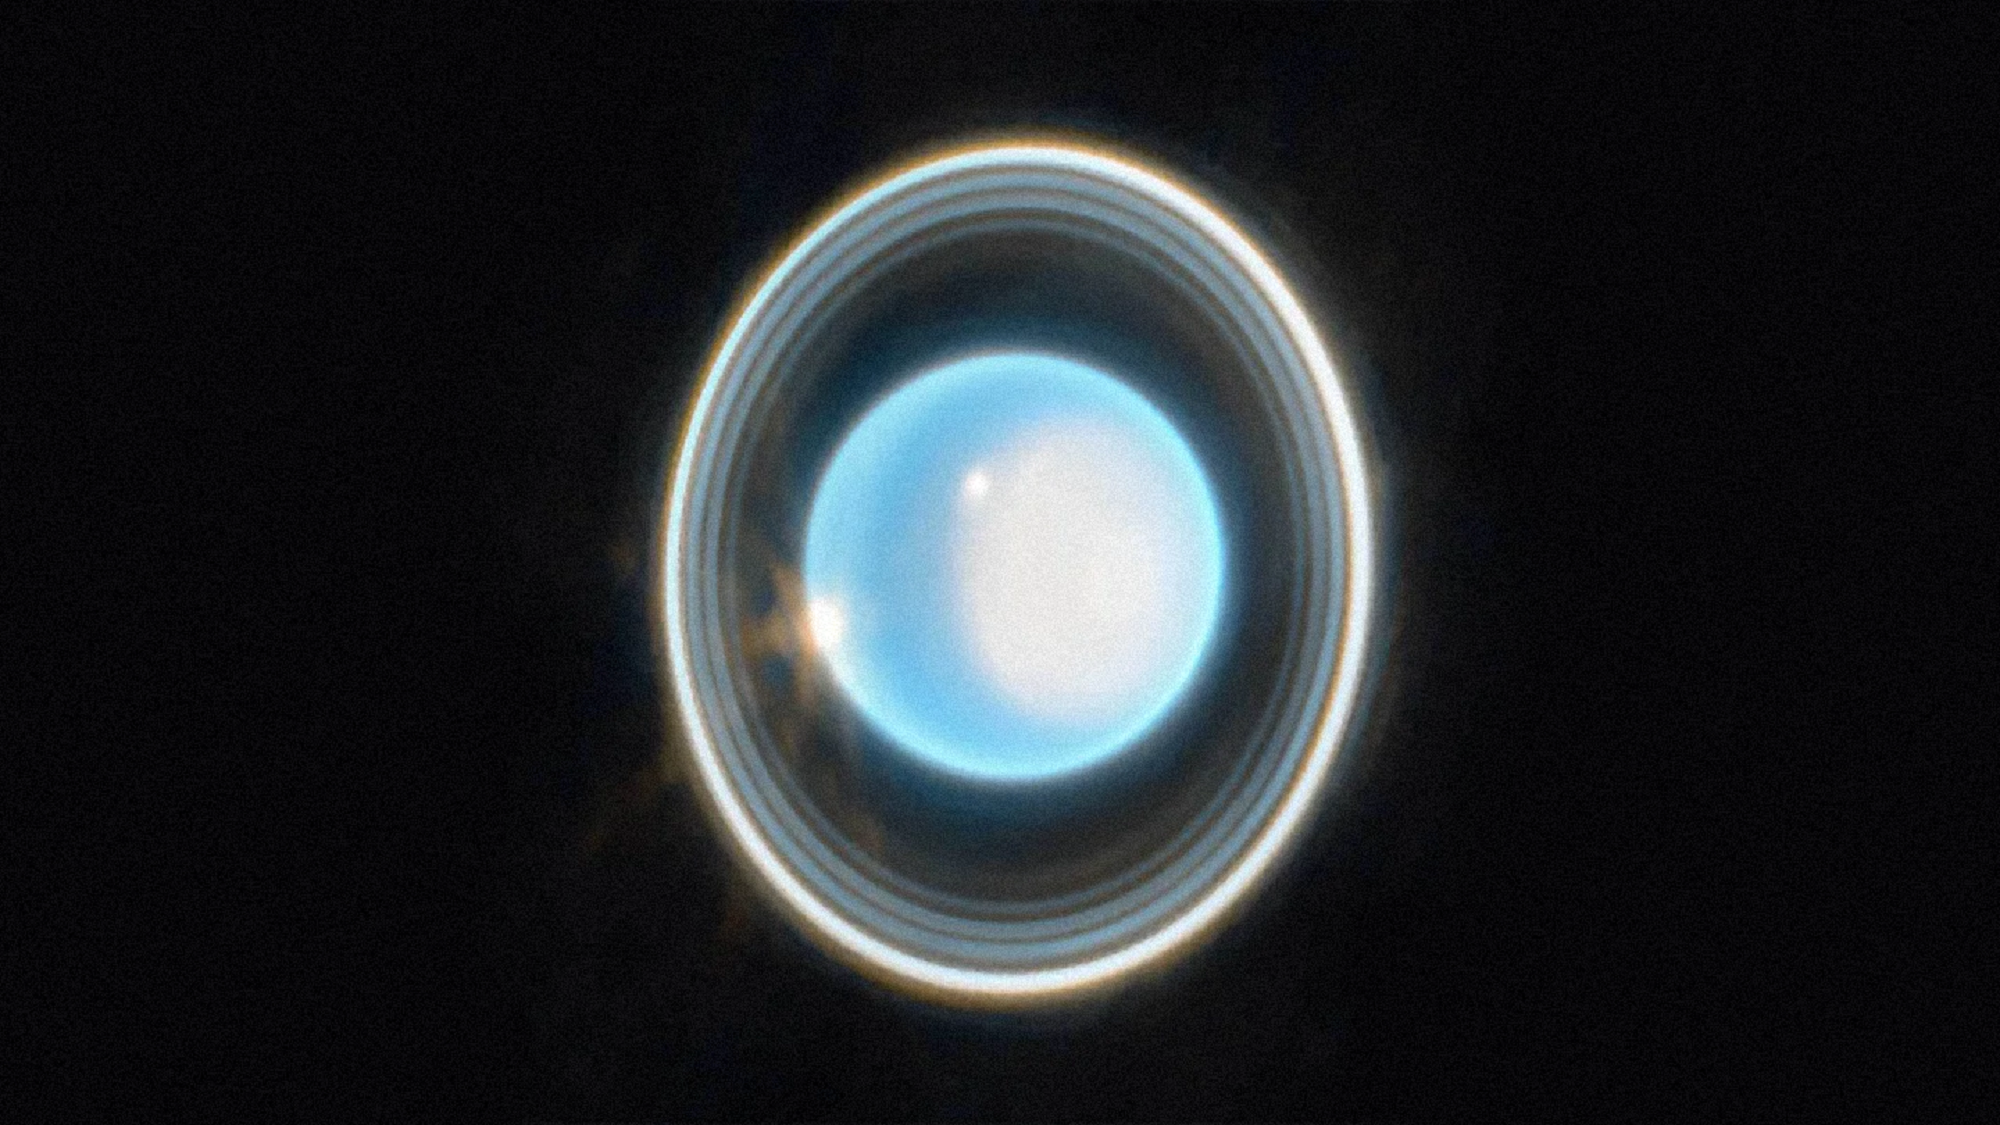 Pale blue Uranus with clearly detailed rings captured by NASA's James Webb Space Telescope